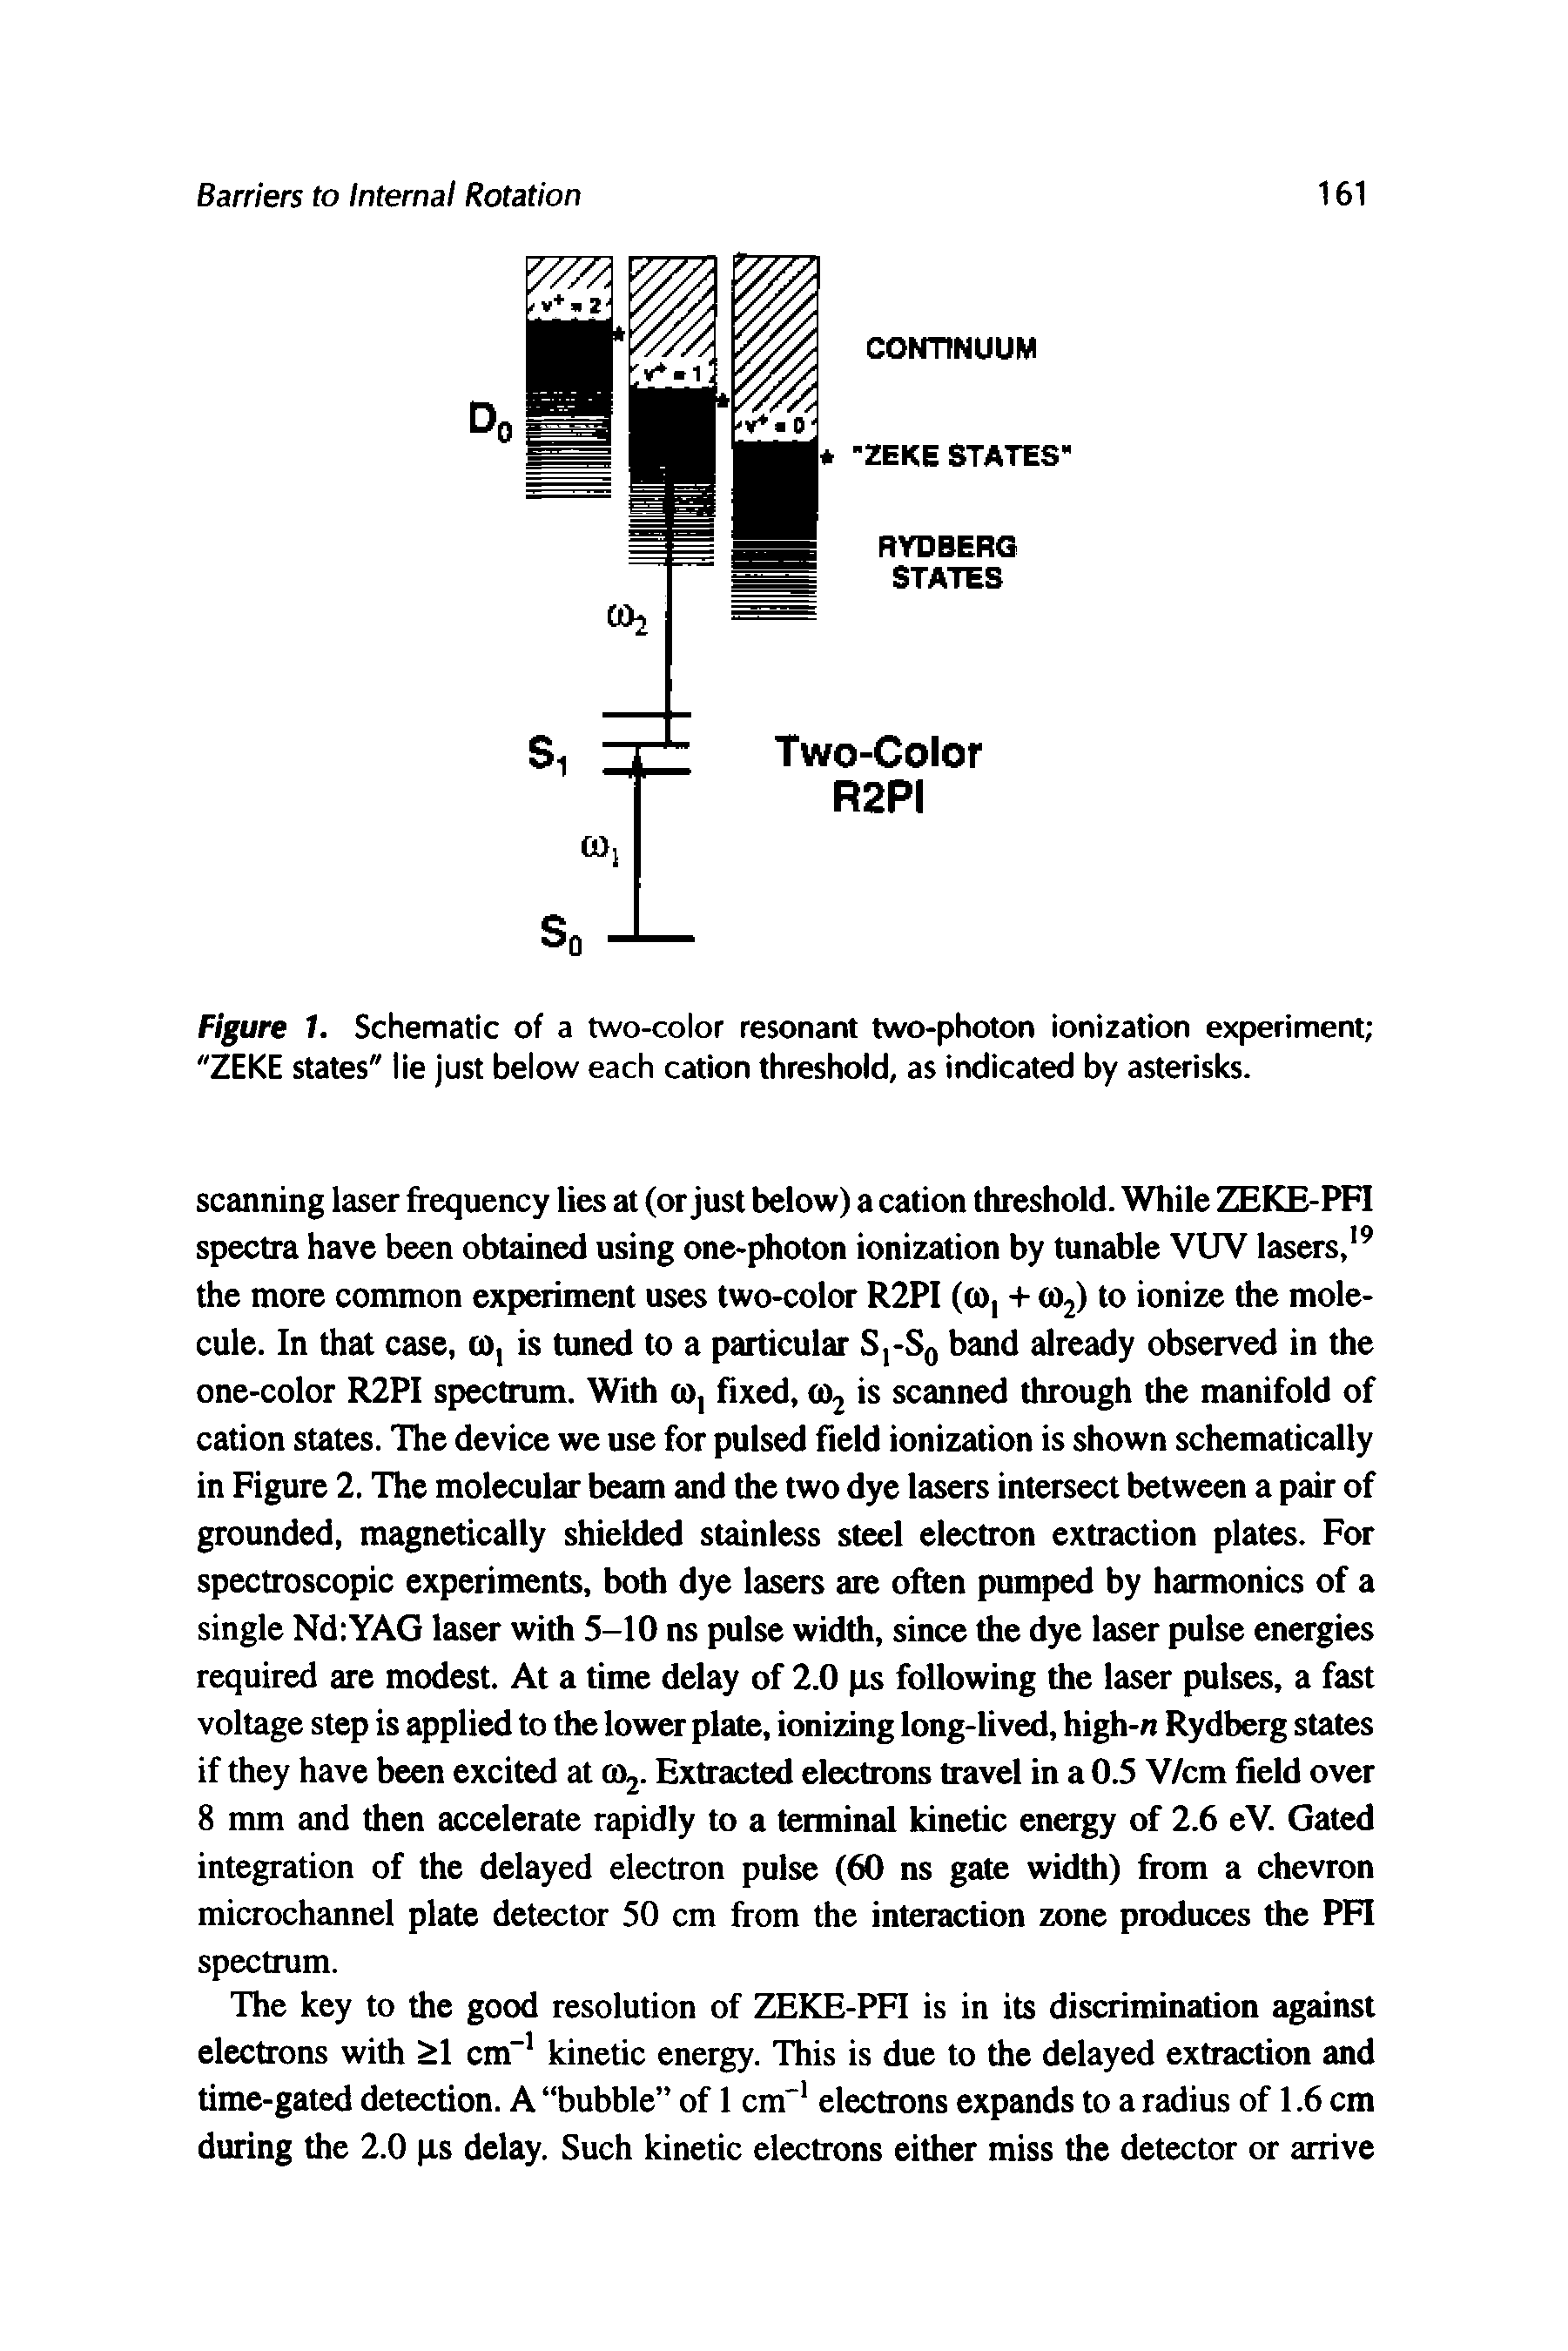 Figure 1. Schematic of a two-color resonant two-photon ionization experiment "ZEKE states" lie just below each cation threshold, as indicated by asterisks.